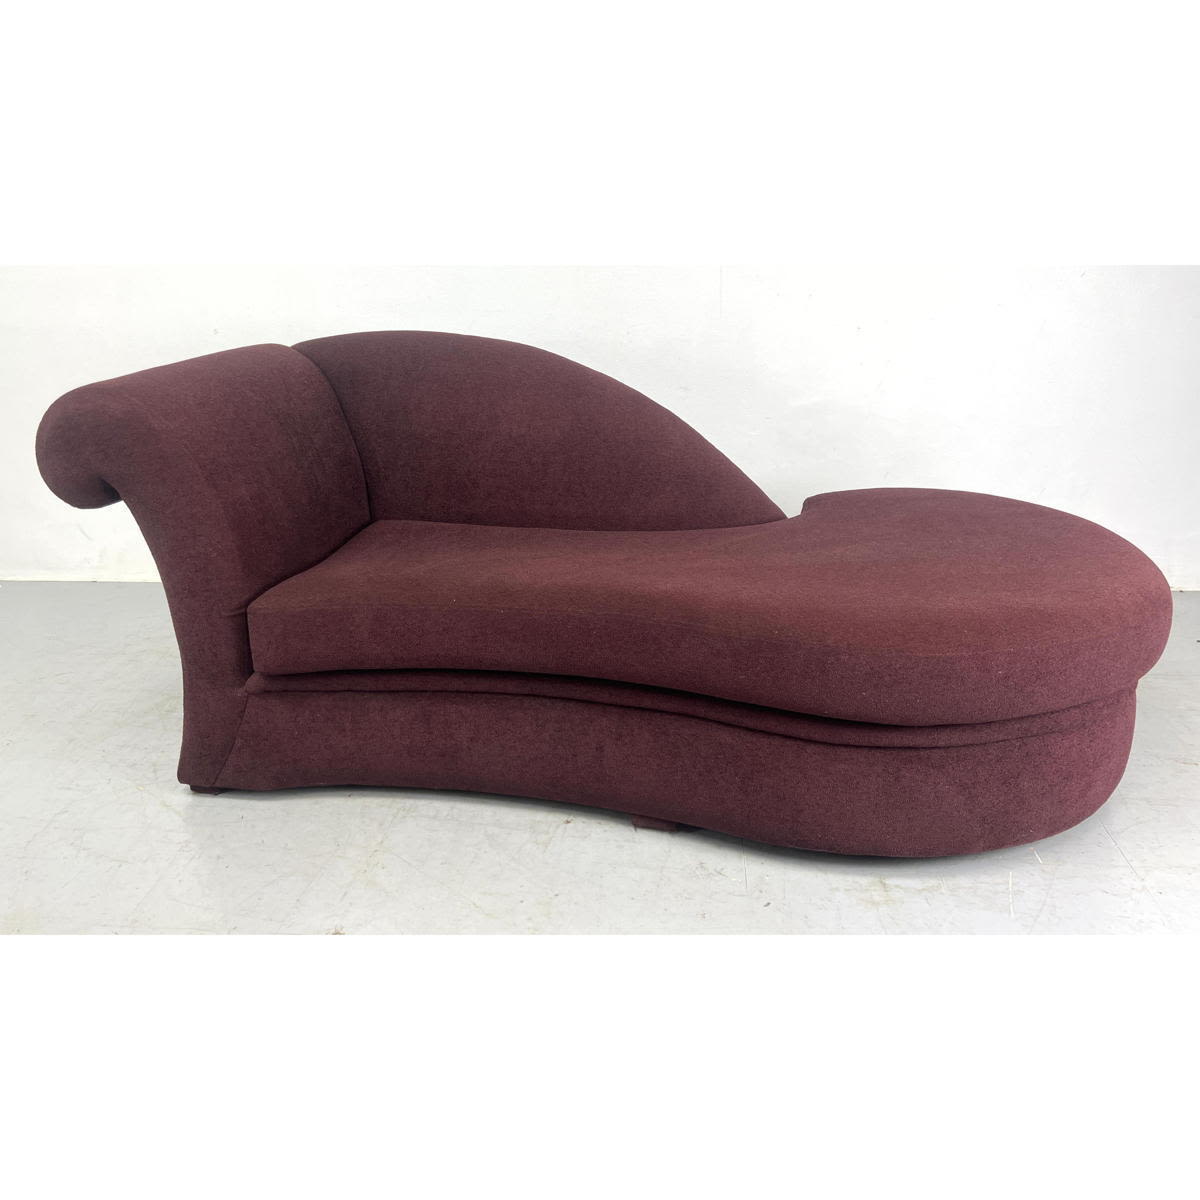 Kagan style Sexy Modernist Couch